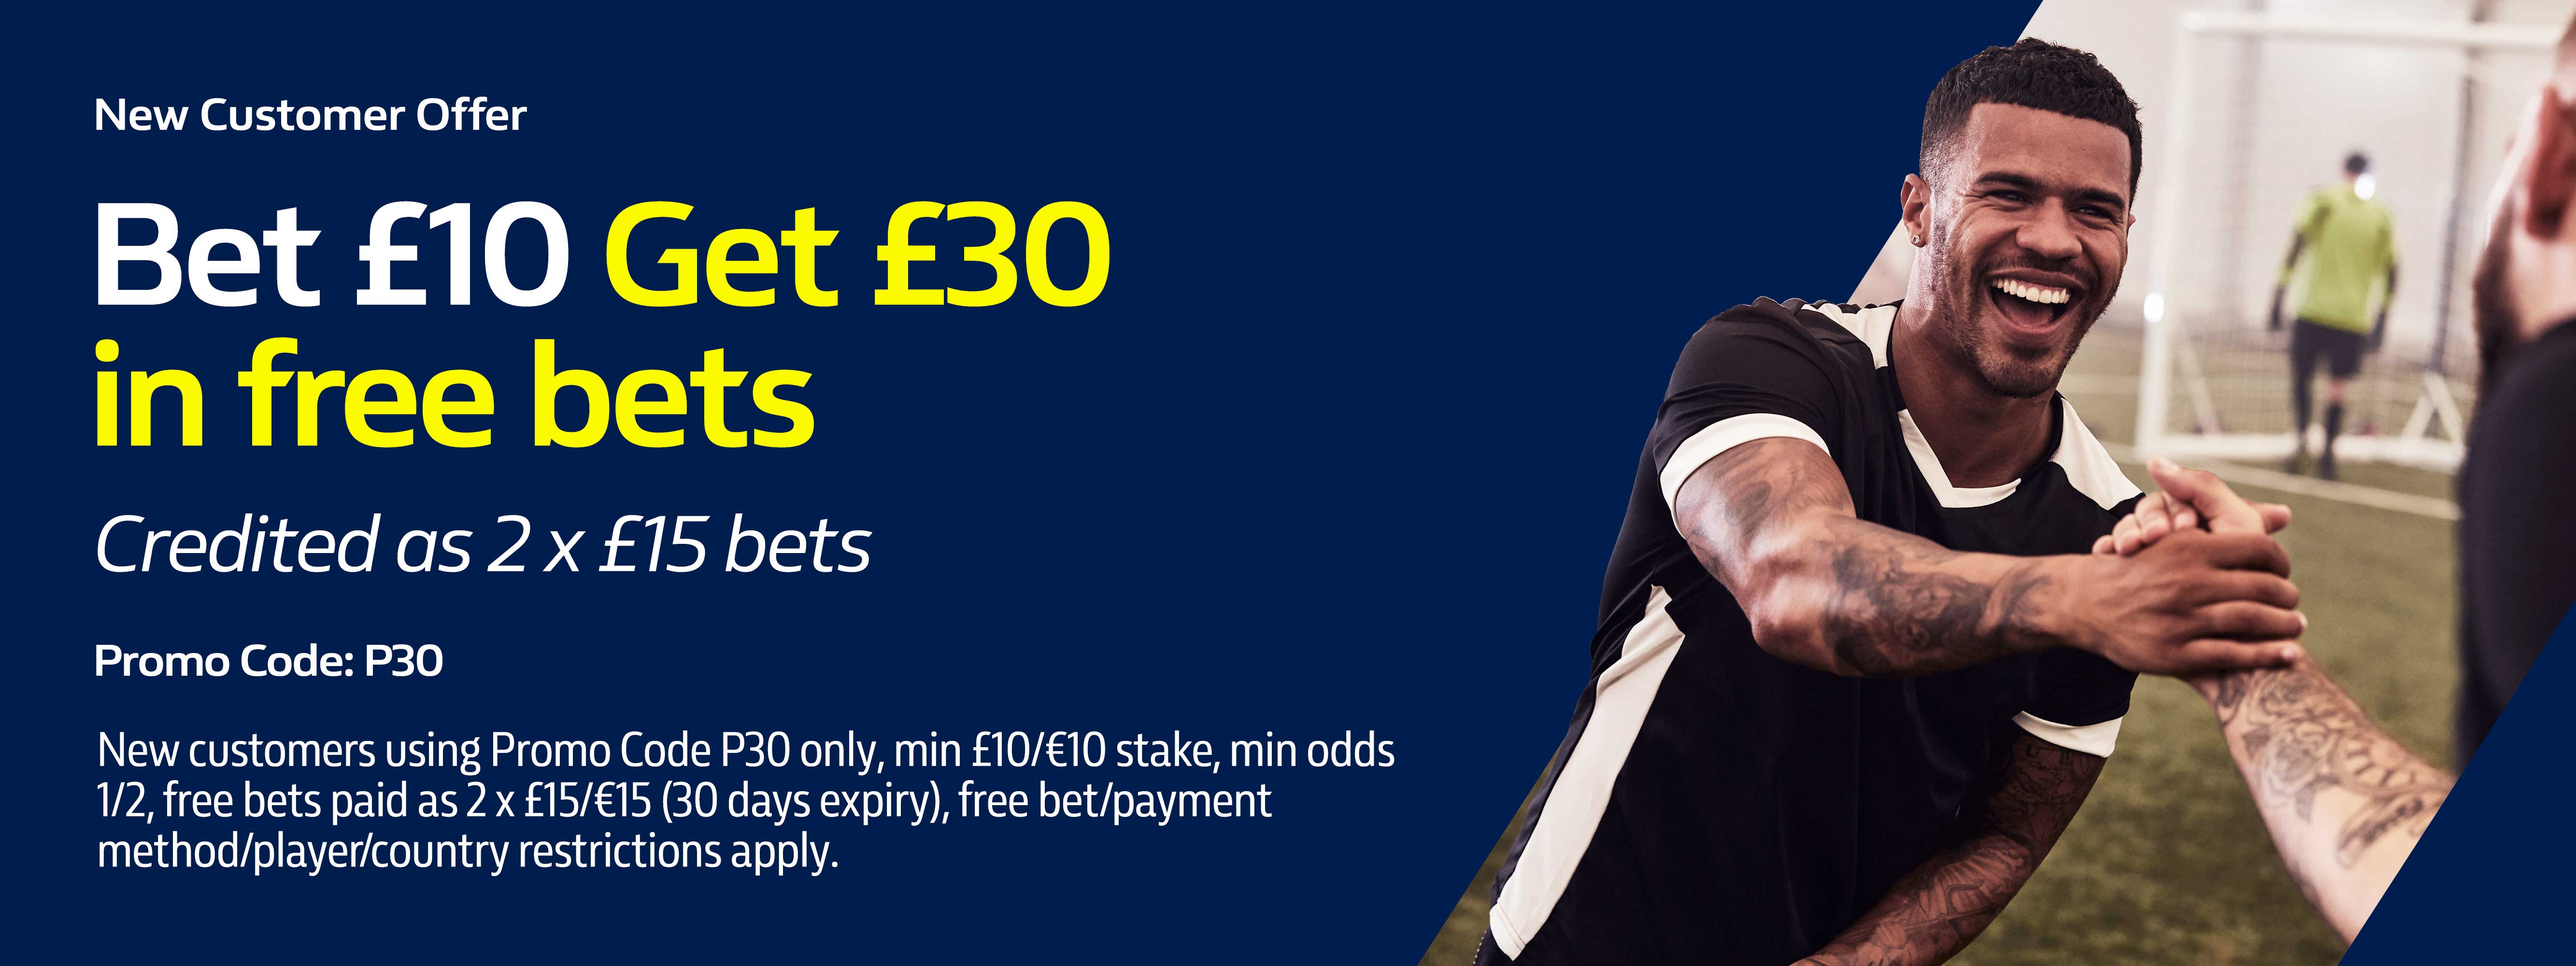 william hill welcome offer first bet free bet bonus